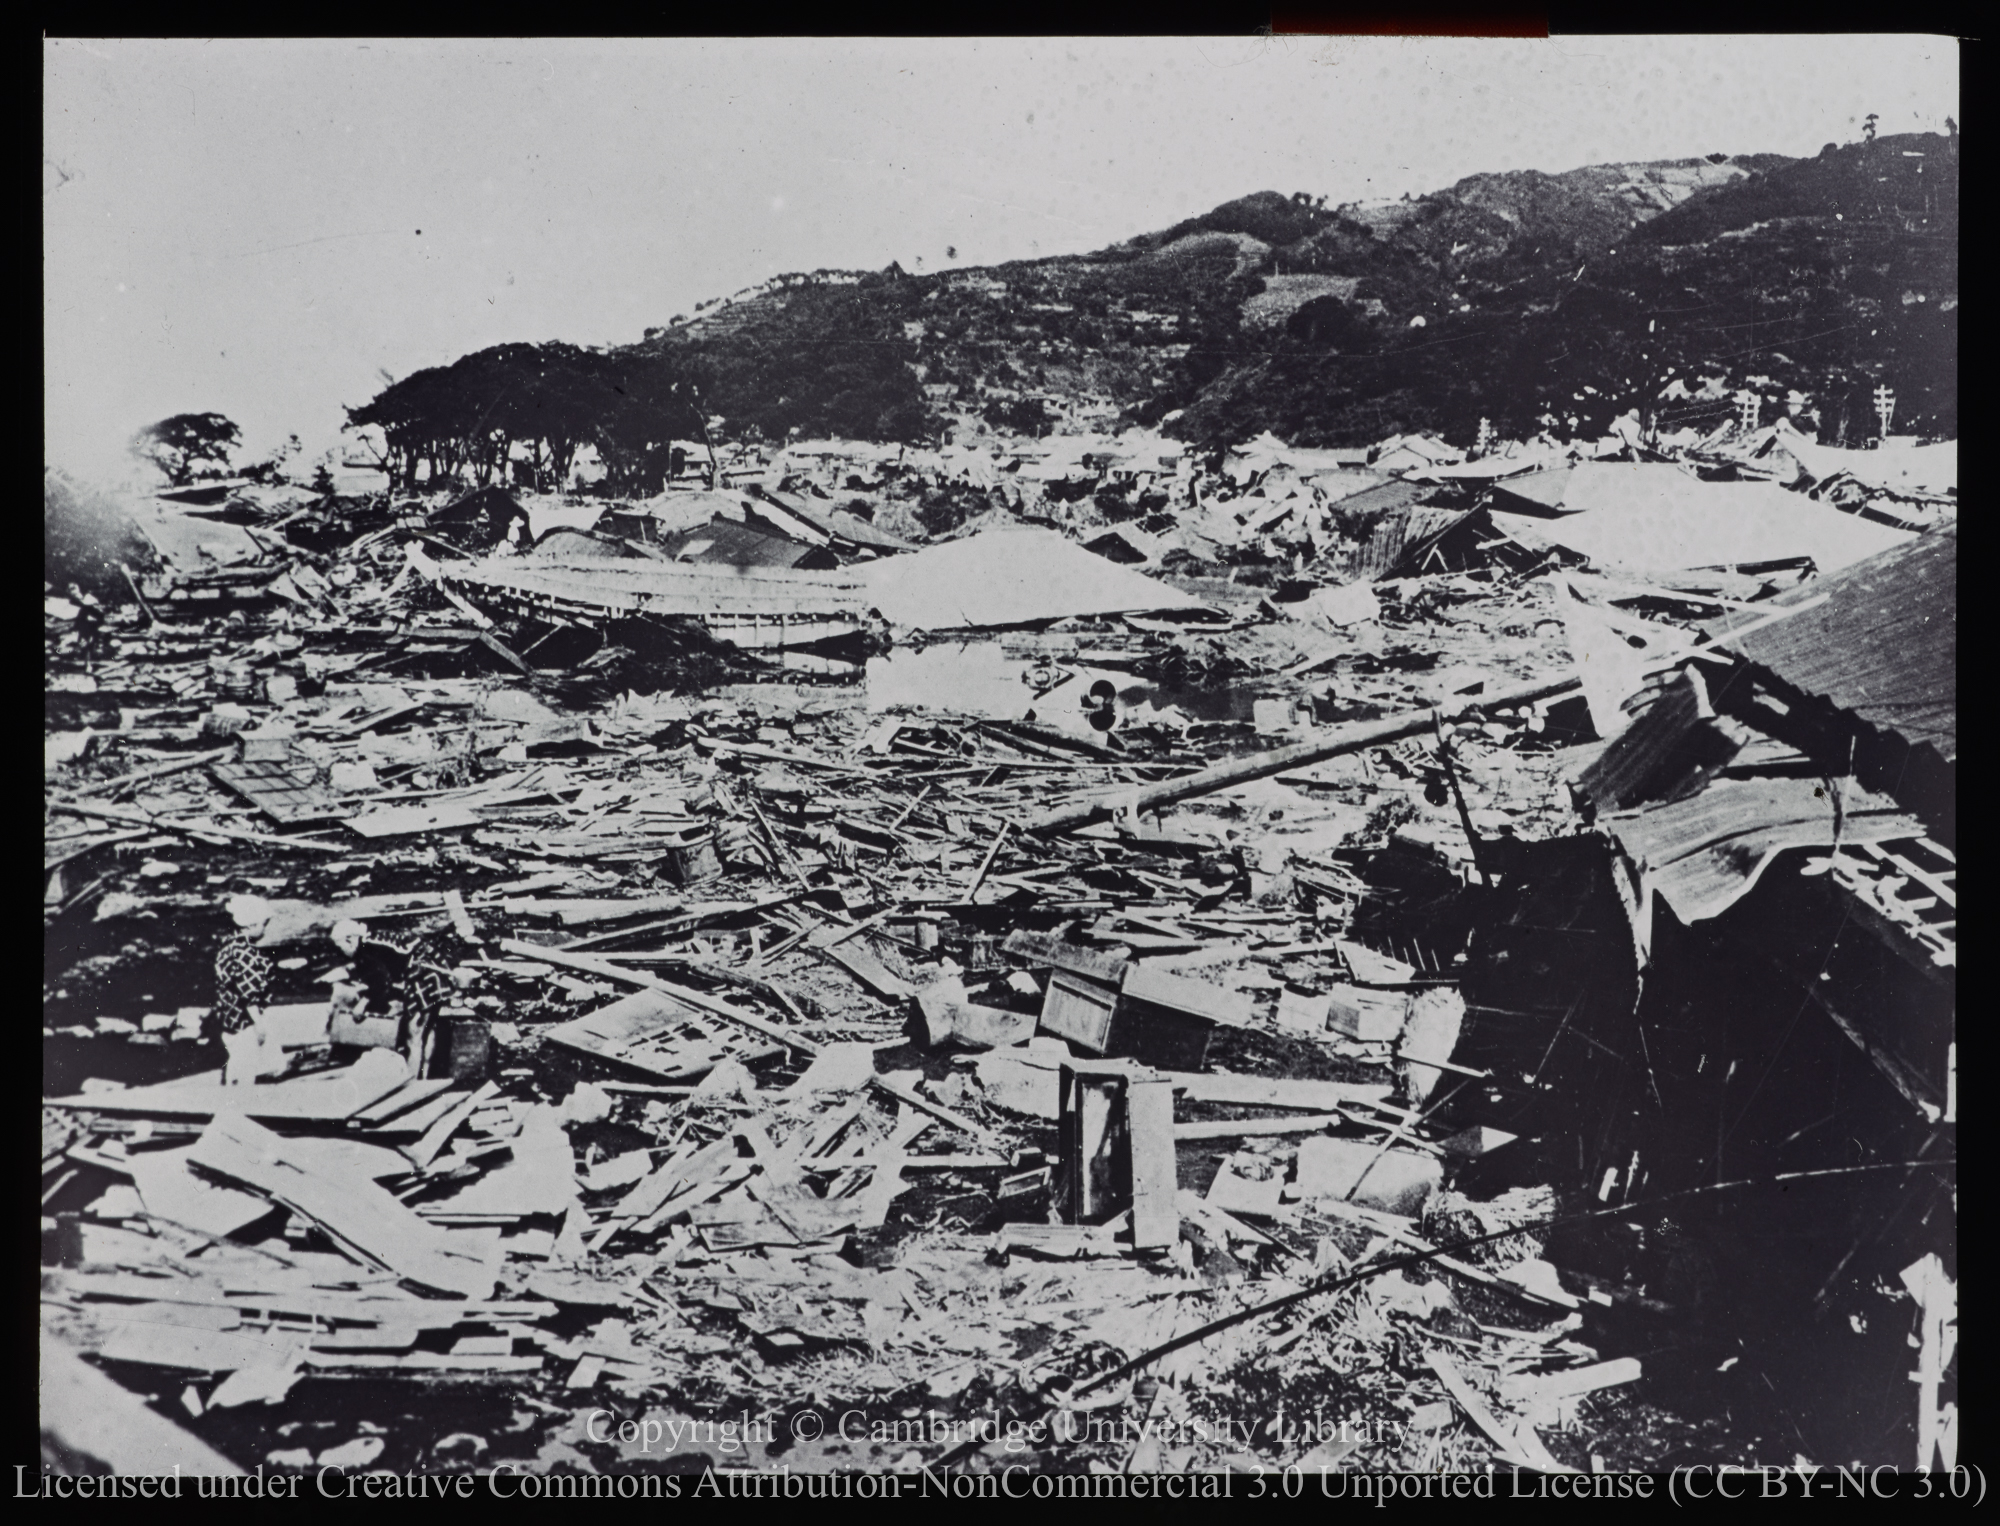 Wreckage of fishing village near Tokyo after 1923 earthquake and typhoon, 1923